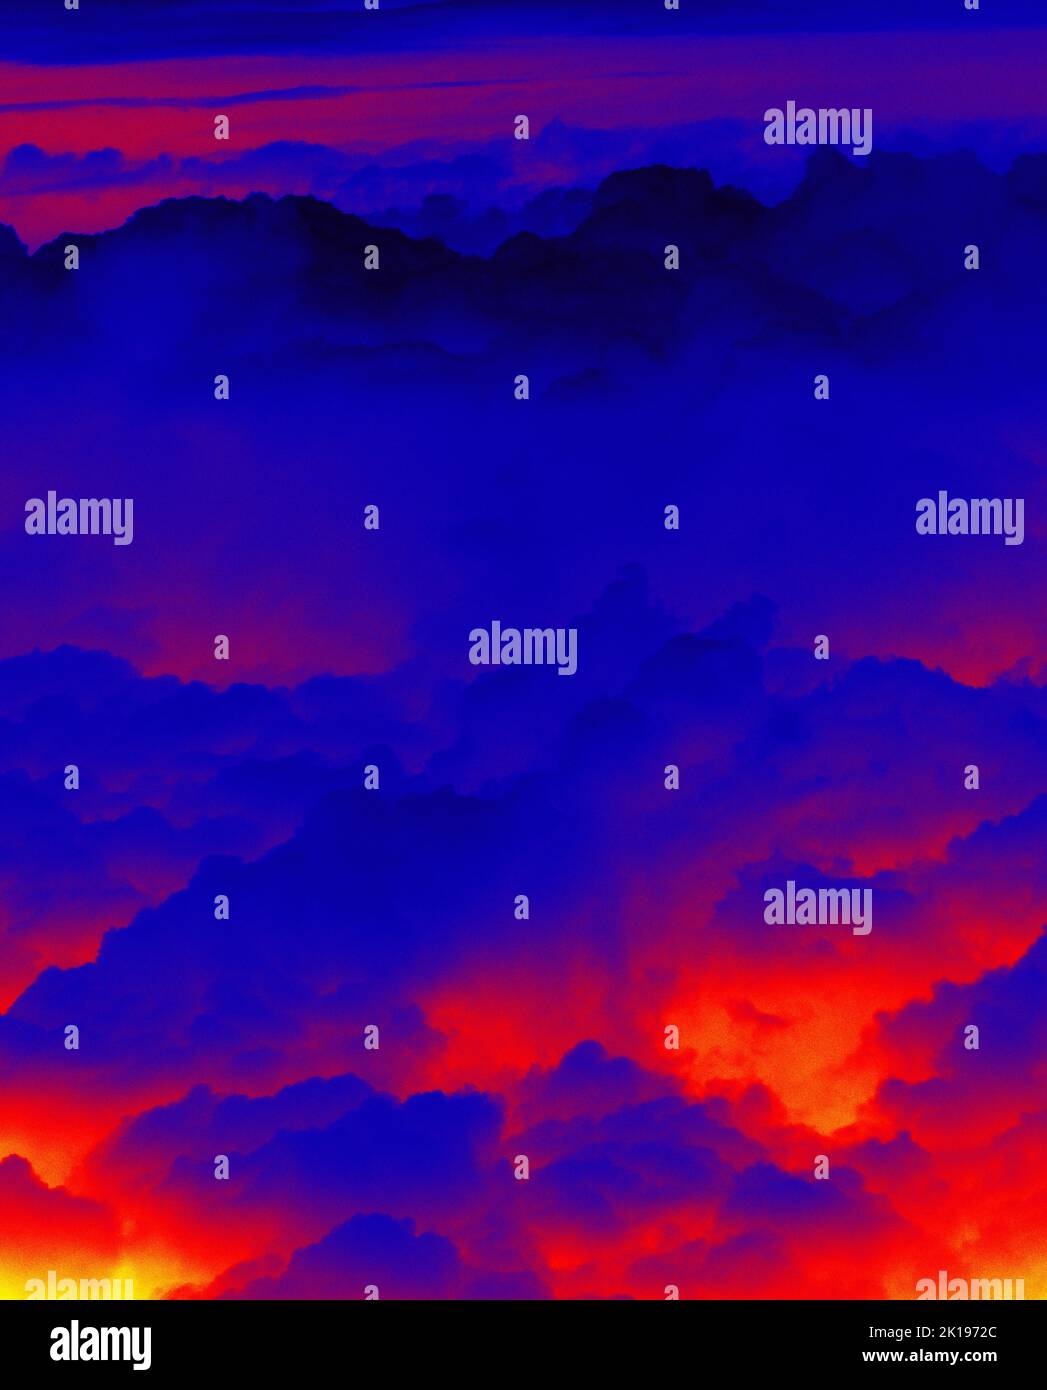 Colored clouds. Cloudscape under the wing of an airplane. Illustration of thermal image, thermal impressionism. Stock Photo